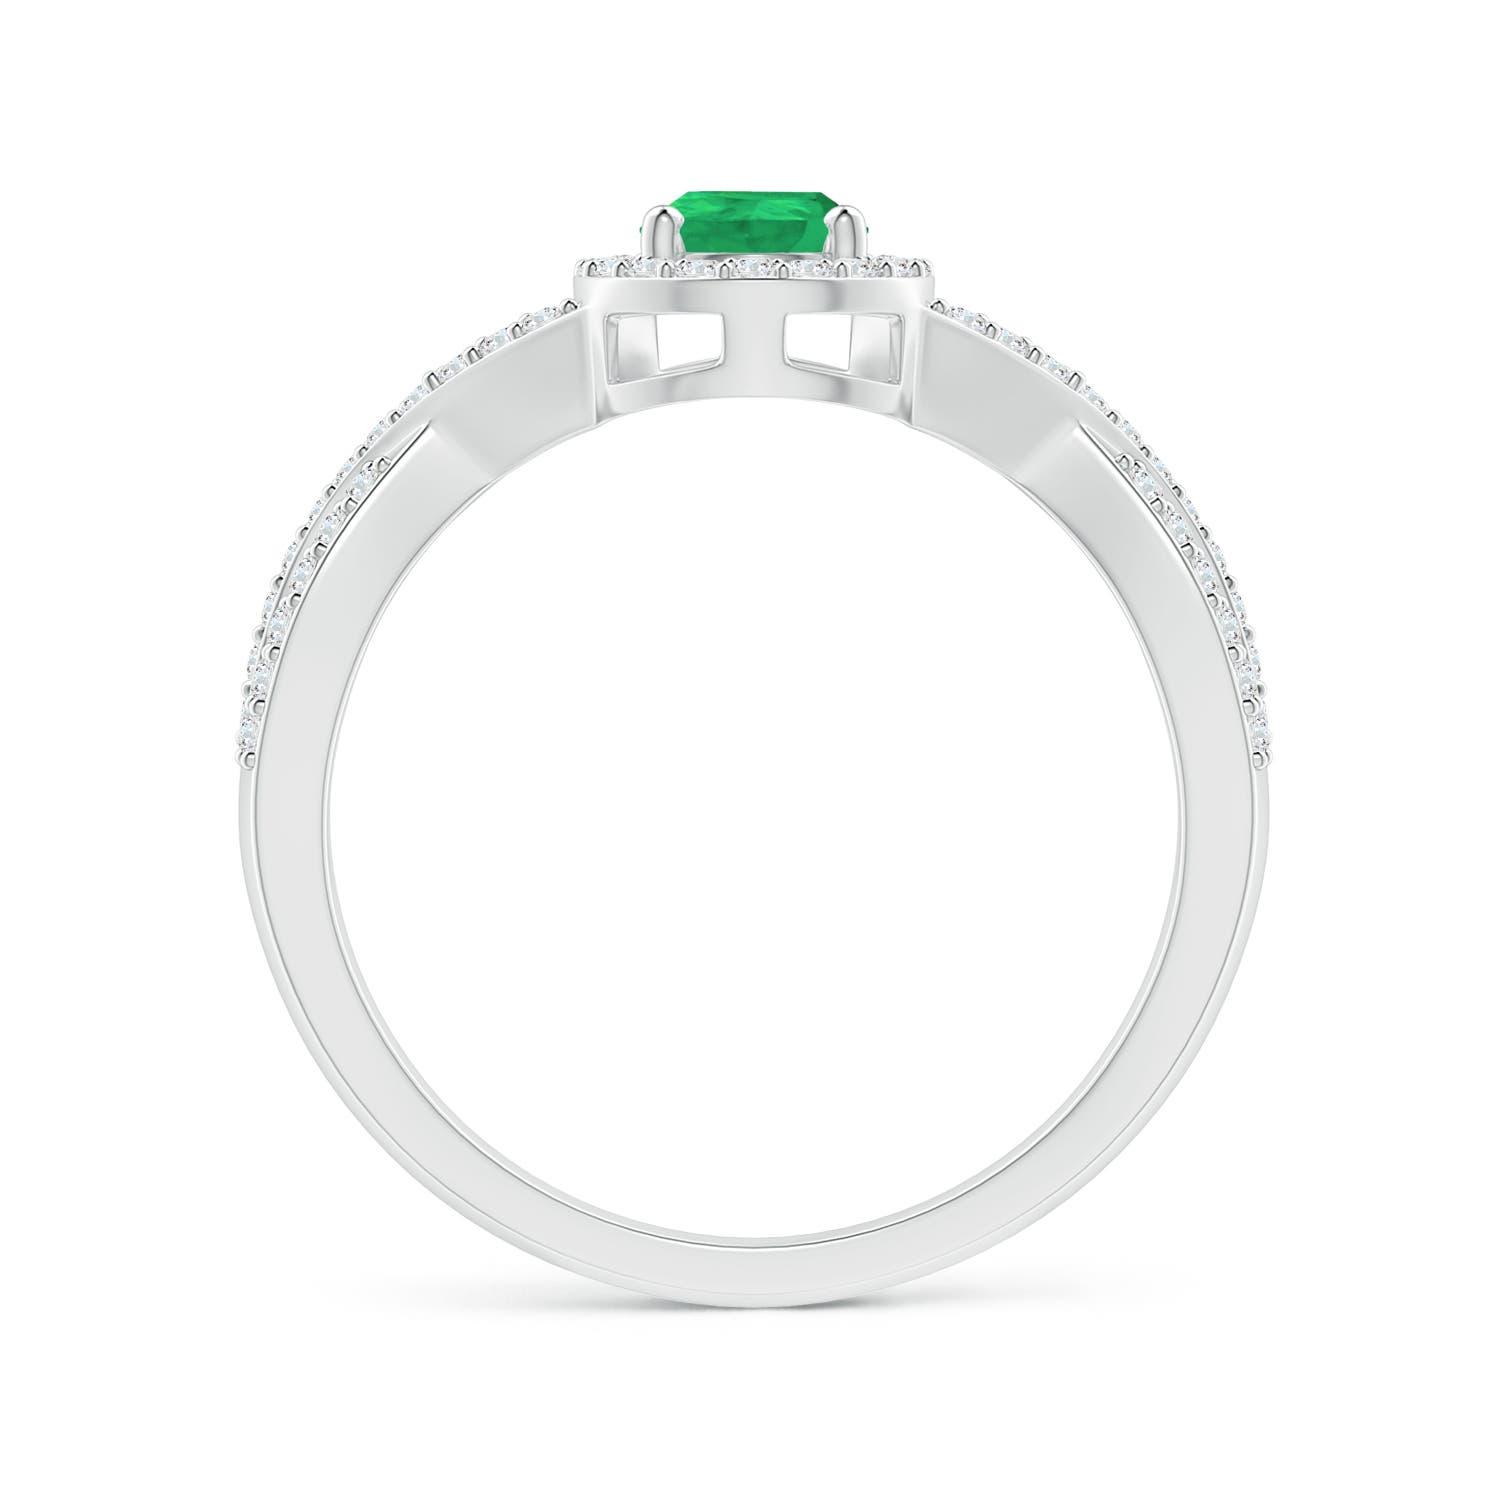 A - Emerald / 0.65 CT / 14 KT White Gold